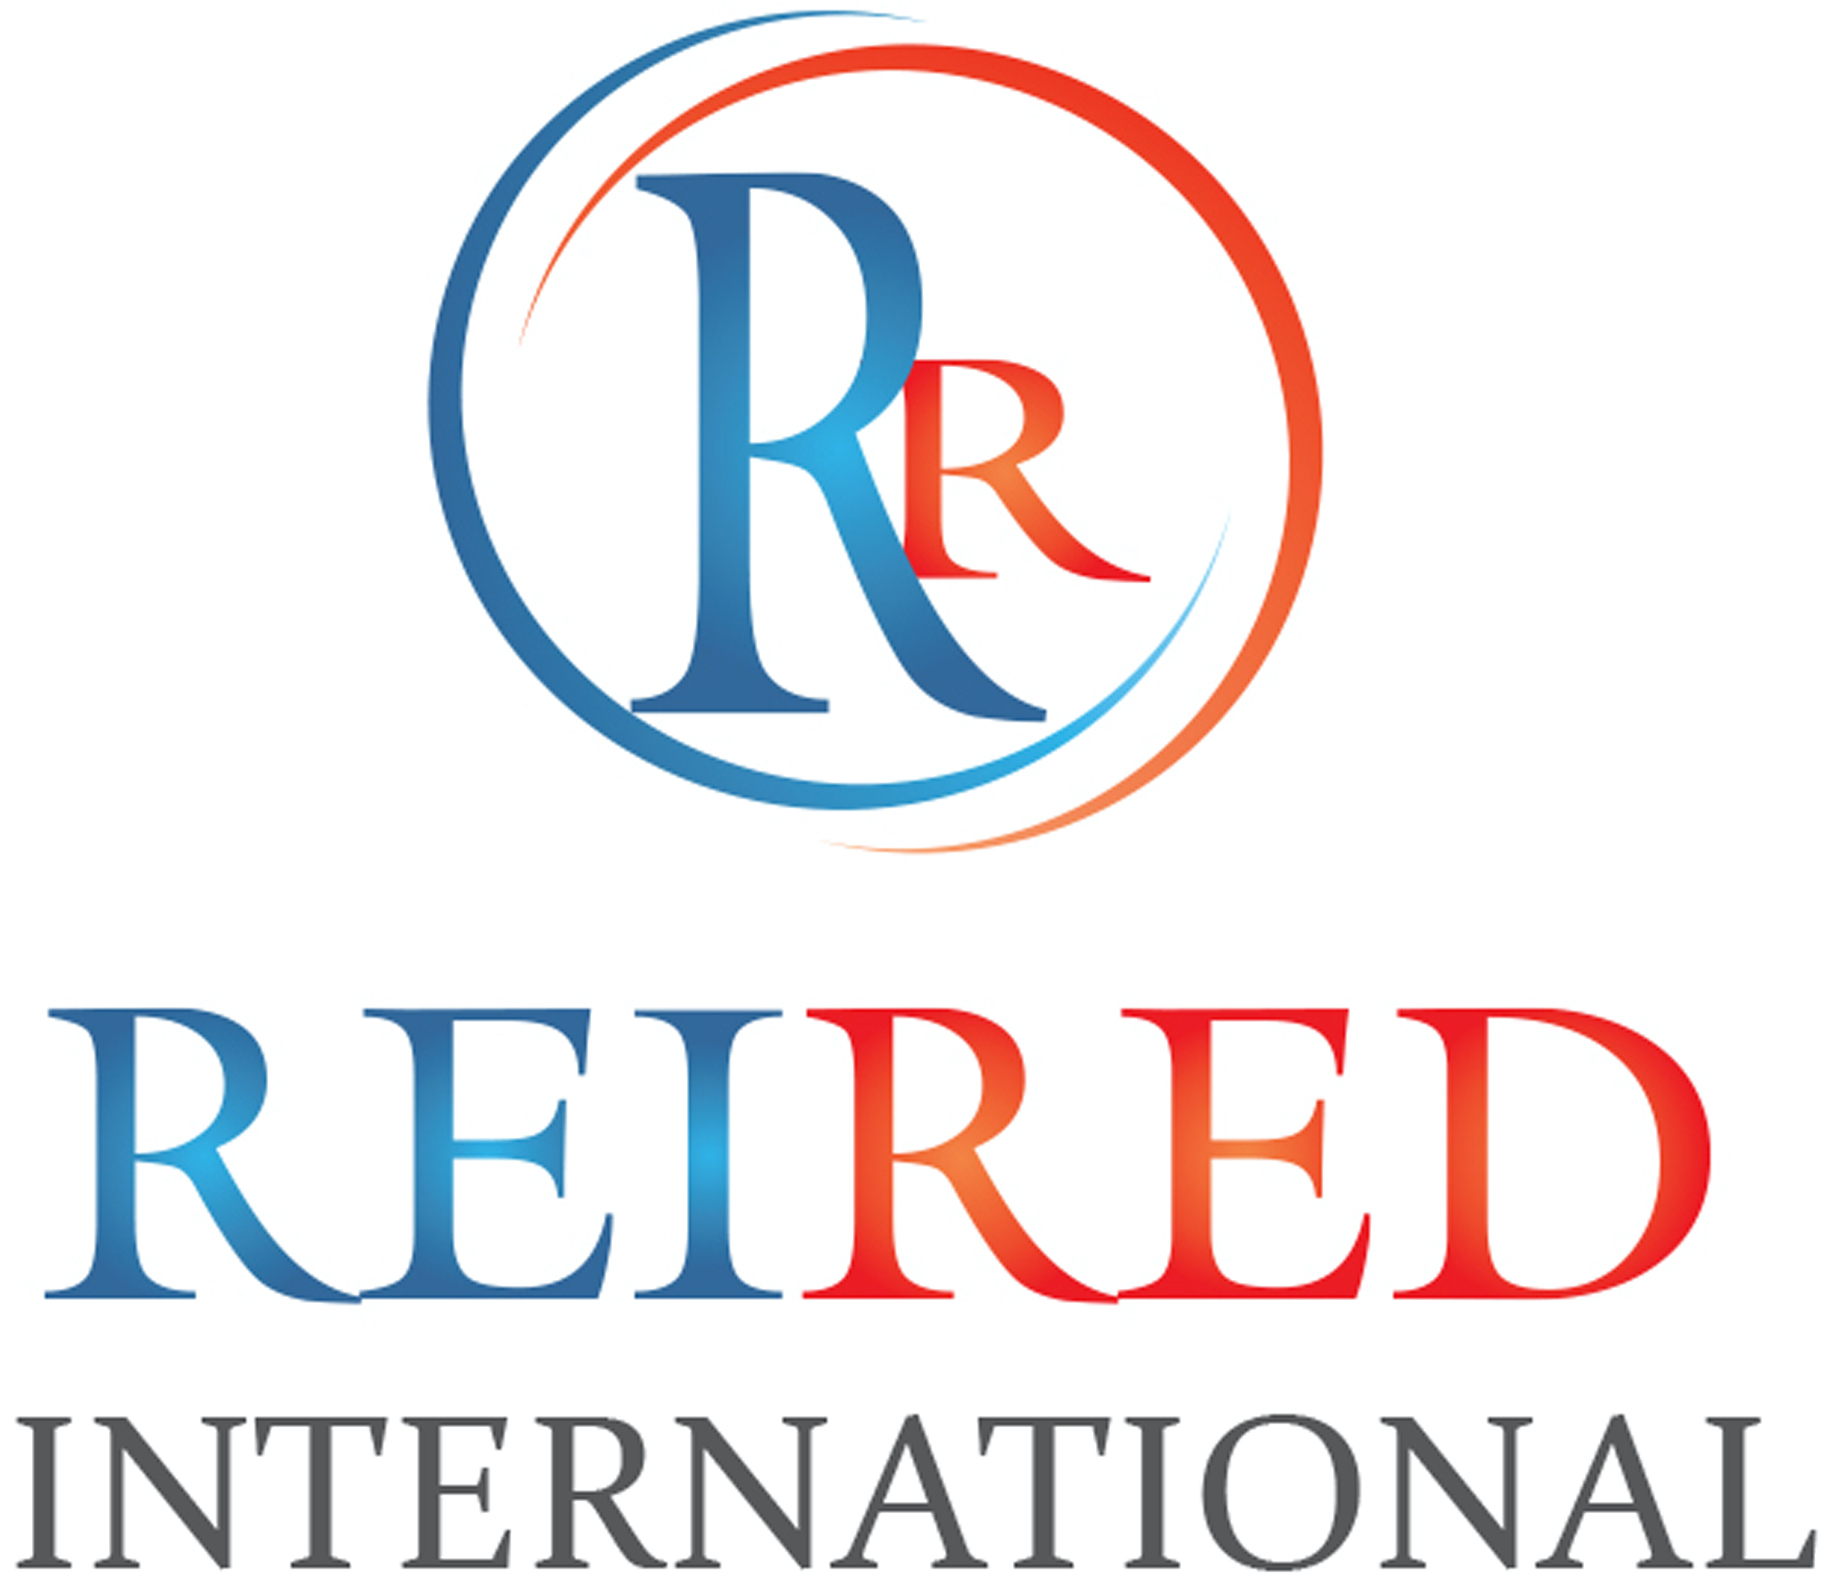 The Turkish Visa Application Center at Reired International Ltd. has implemented a Queue Management System